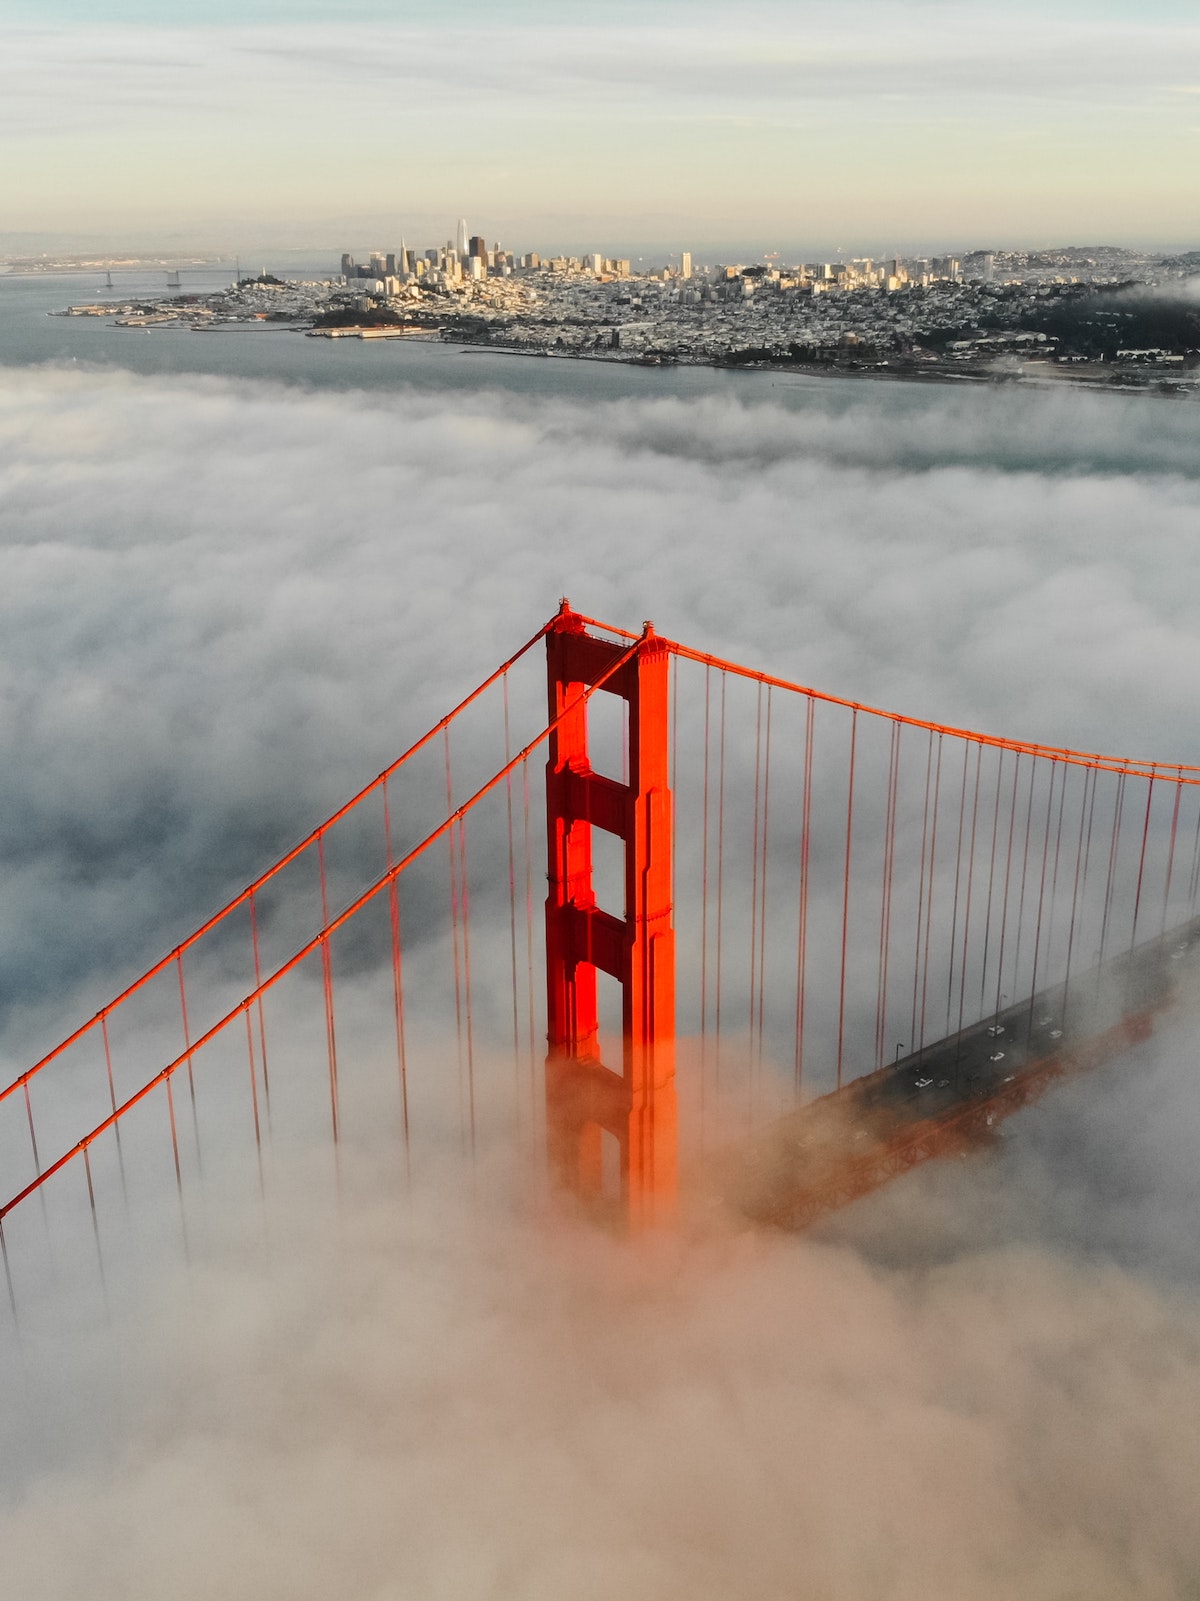 The Golden Gate bridge peeks out from the fog, with the city of San Francisco in the far background.